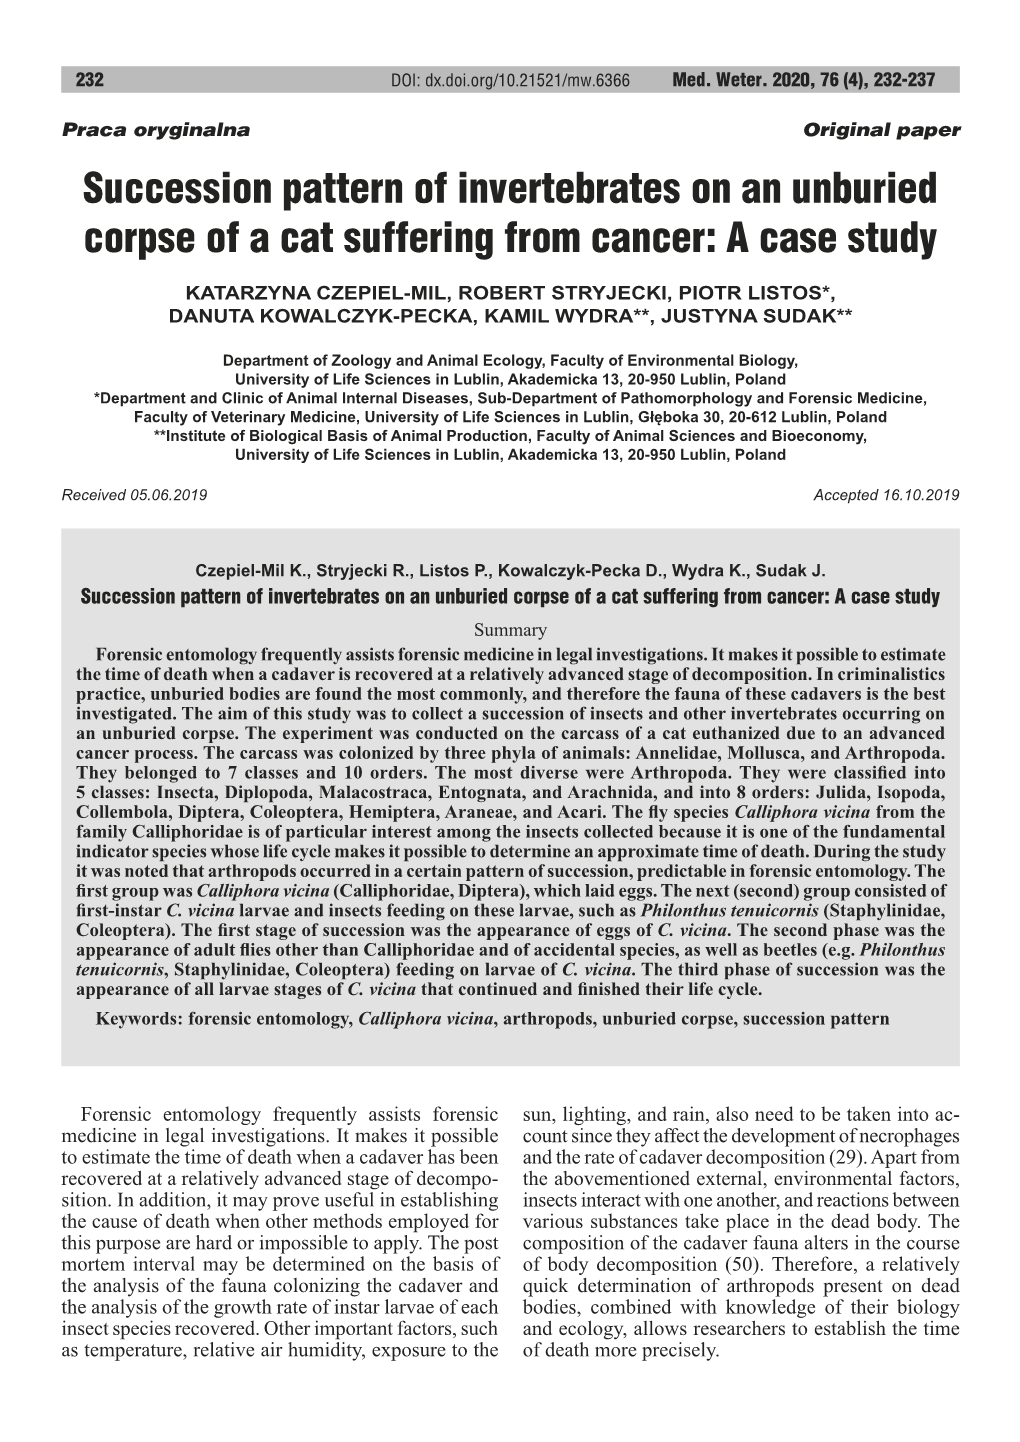 Succession Pattern of Invertebrates on an Unburied Corpse of a Cat Suffering from Cancer: a Case Study